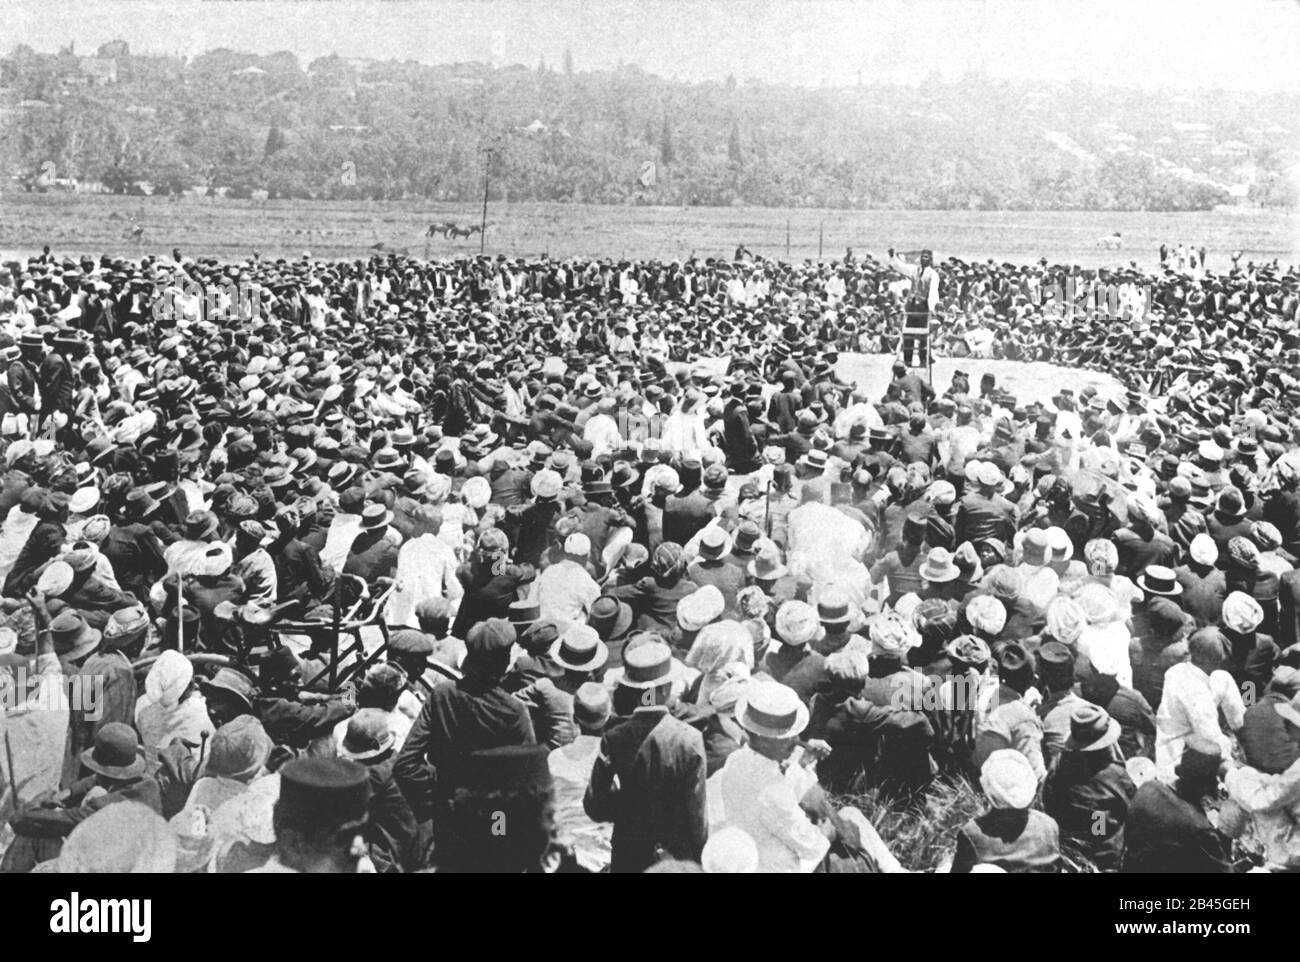 Meeting on Durban Indian Football Ground, South Africa, during the Satyagraha Campaign of 1913 old vintage 1900s picture Stock Photo